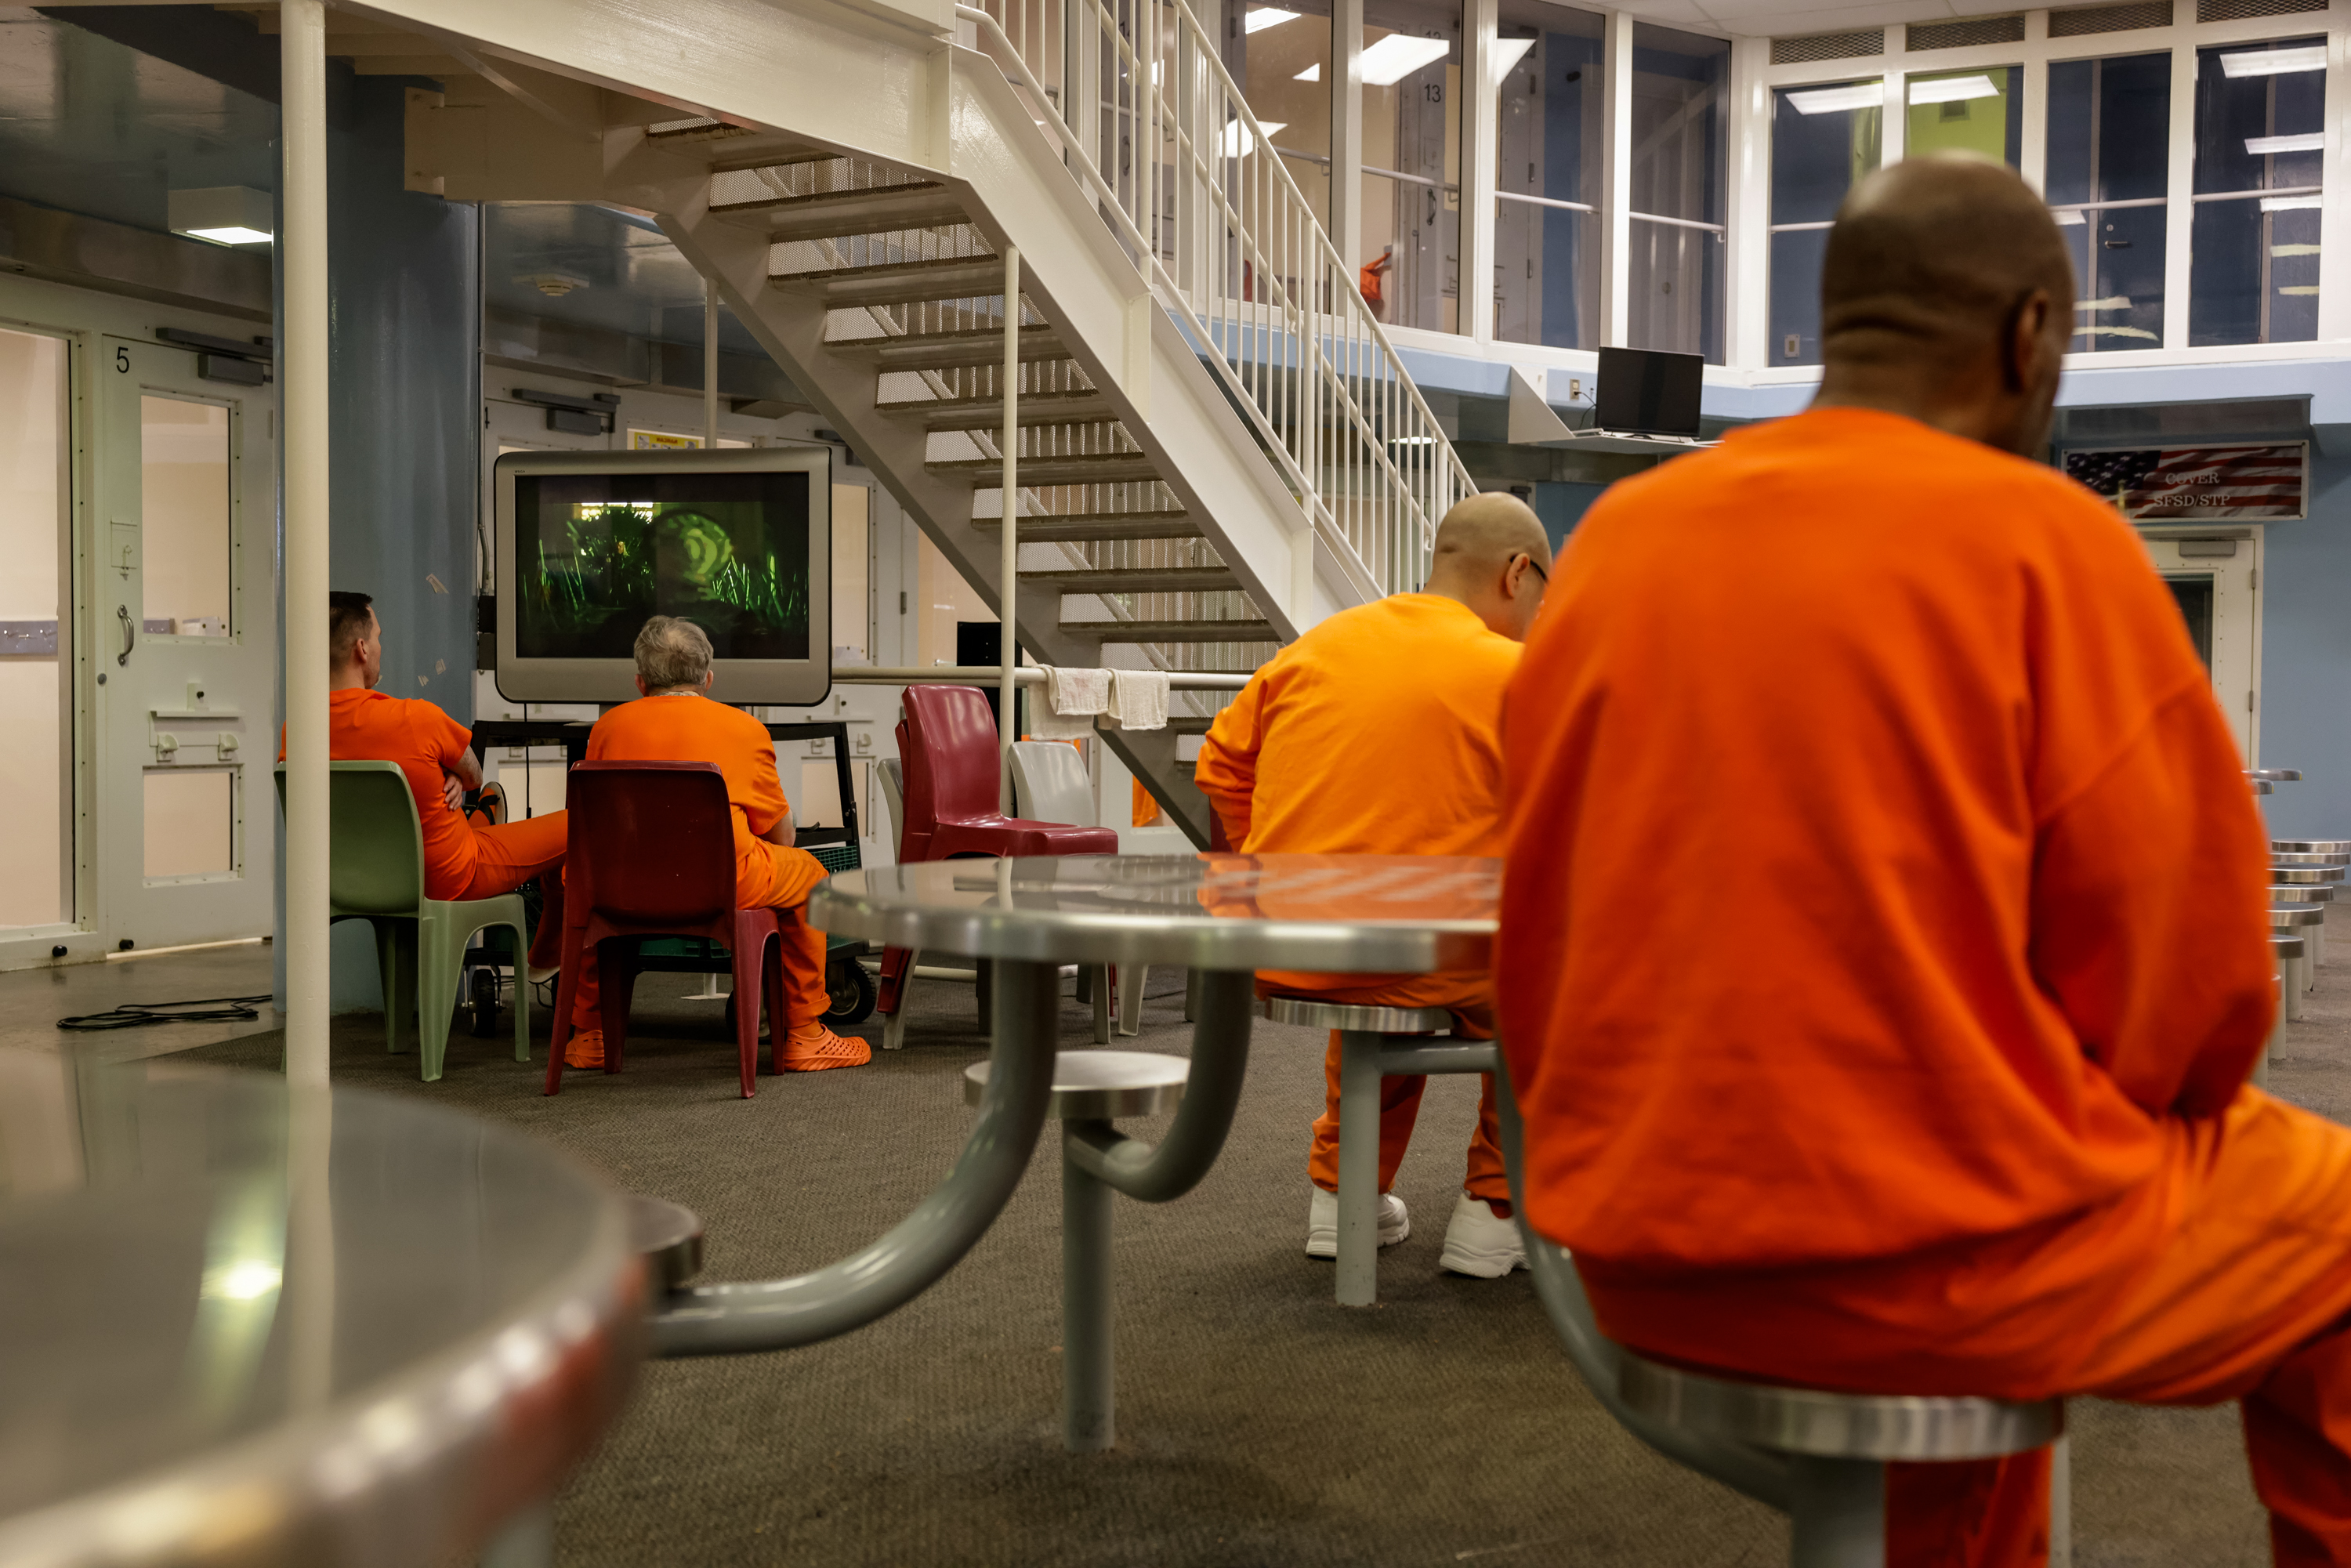 Inmates sit at a table in the communal room of the jail cell block.